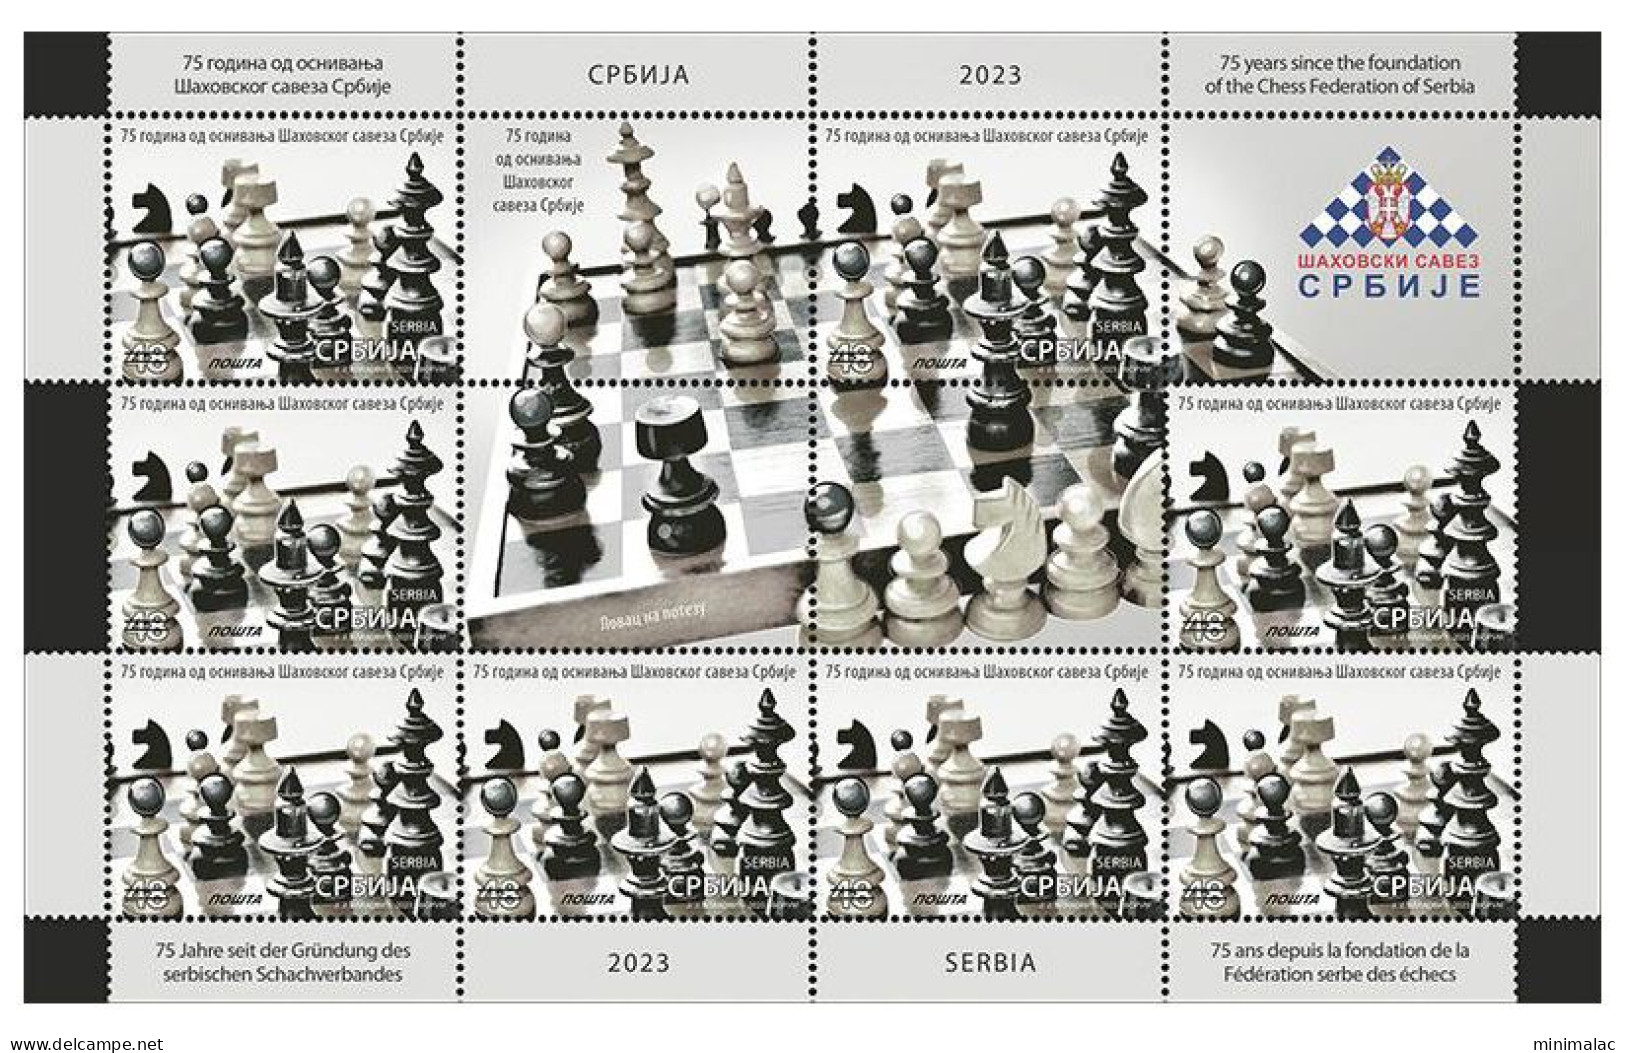 Serbia 2023. 75 Years Since The Foundation Of The Chess Federation Of Serbia, Mini Sheet, MNH - Serbien